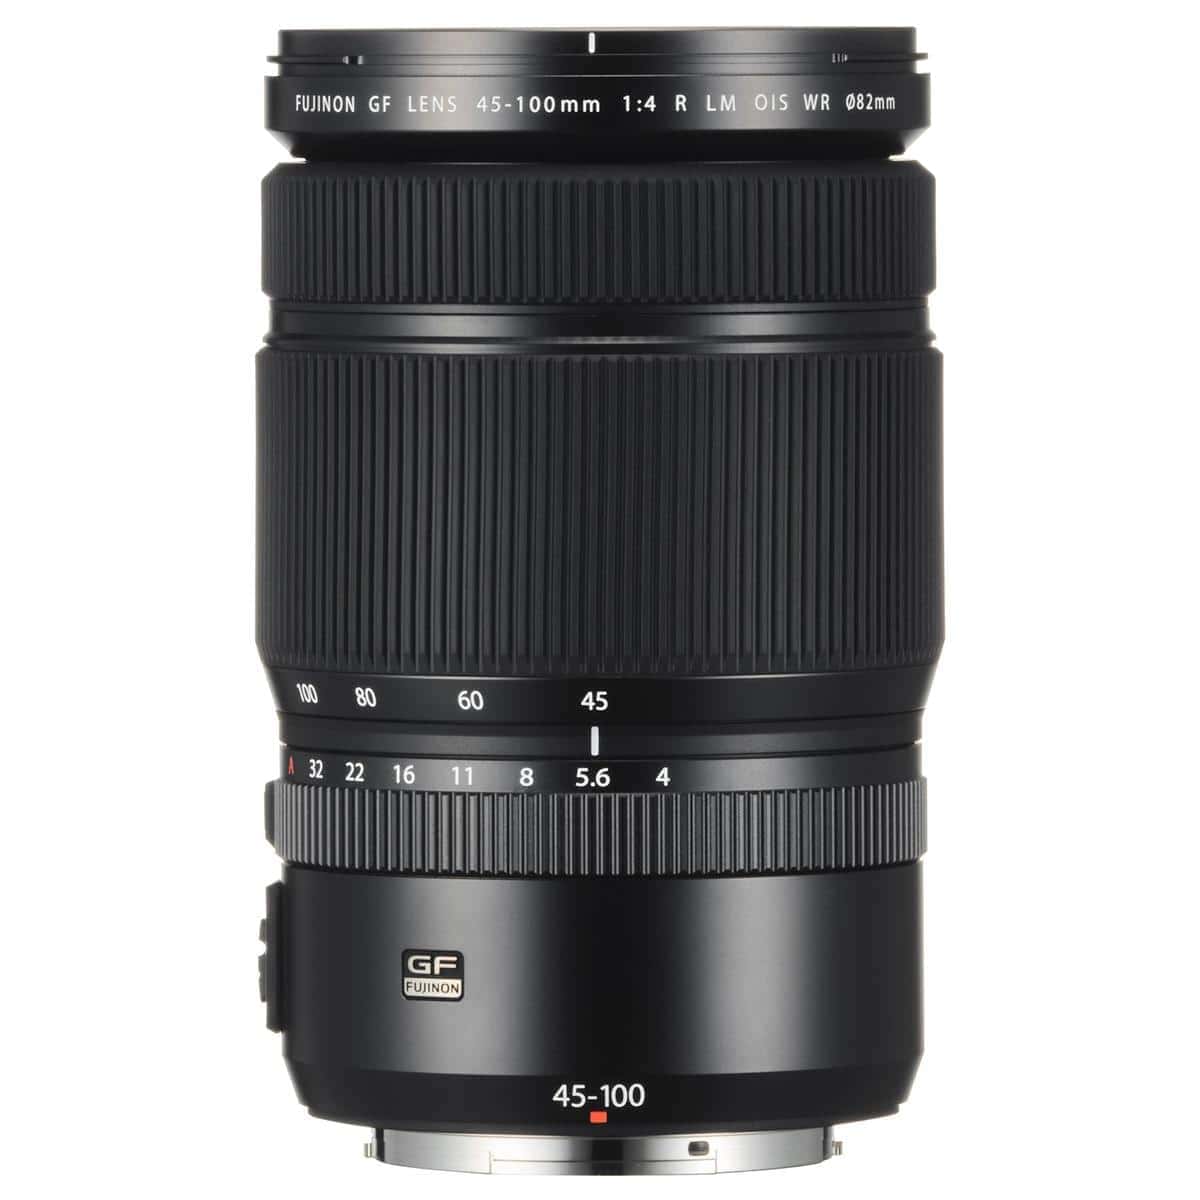 Fujifilm GF 45-100mm F4 R LM WR Zoom Lens (36-79mm in 35mm equivalent) has a constant f/4 maximum aperture, offering consistent performance throughout its zoom range. It has an Optical Image Stabilization system that compensates for up to five stops of camera shake, allowing for a better handheld shooting experience while yielding sharp images. The lens is also lightweight and weather-sealed.